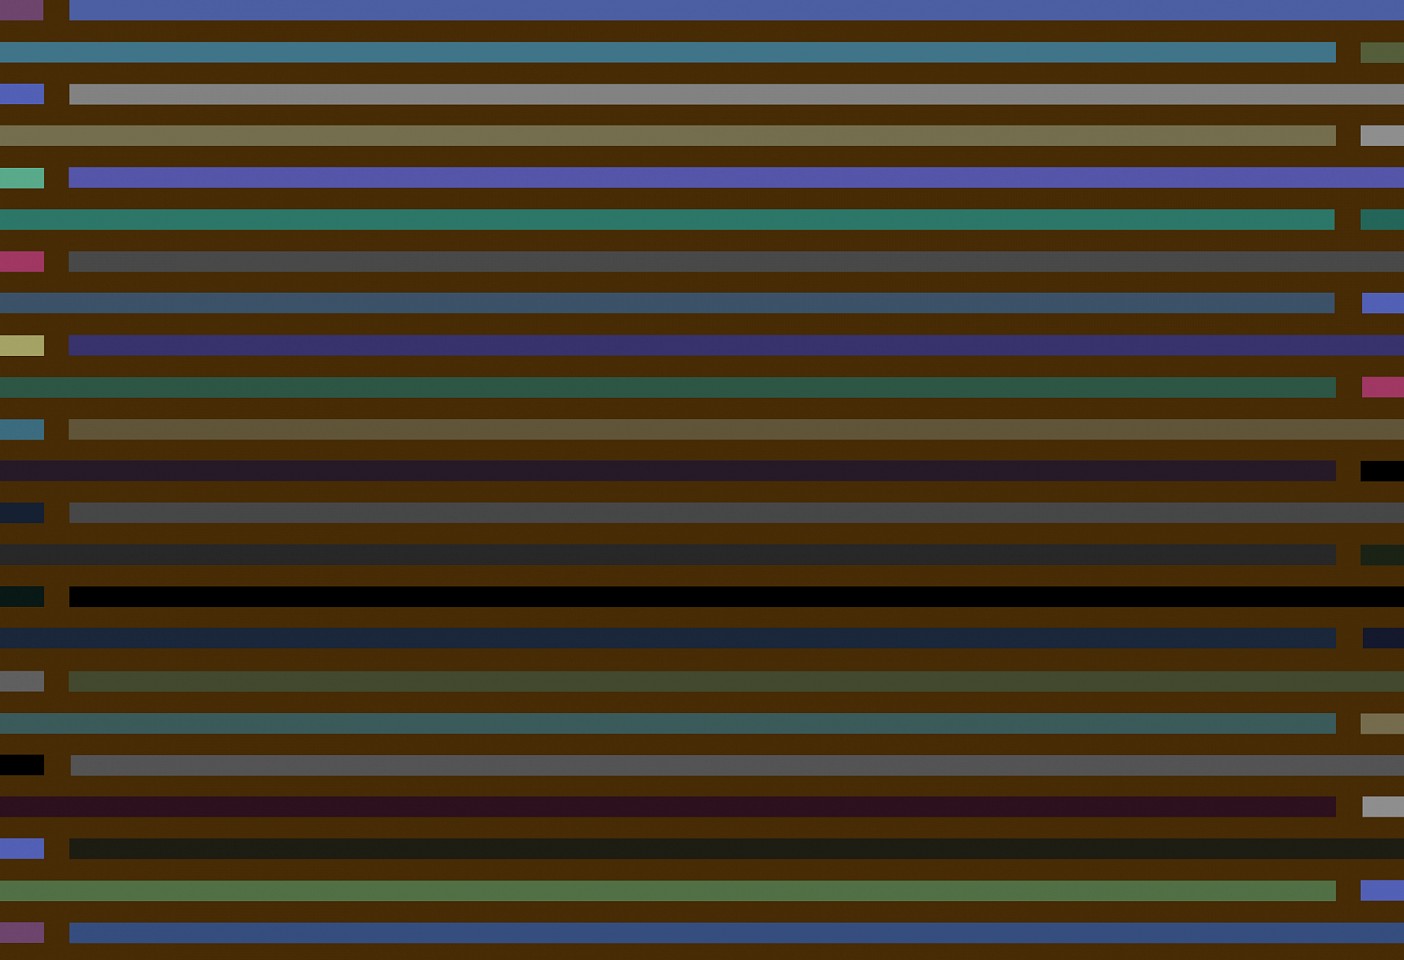 Dane Albert, Color Sticks #28 Night, 2023
Acrylic on canvas (Concept), 48 x 72 in. (121.9 x 182.9 cm)
Series of colored lines and shapes in multiple configurations
DA.2023.sticks-028-night